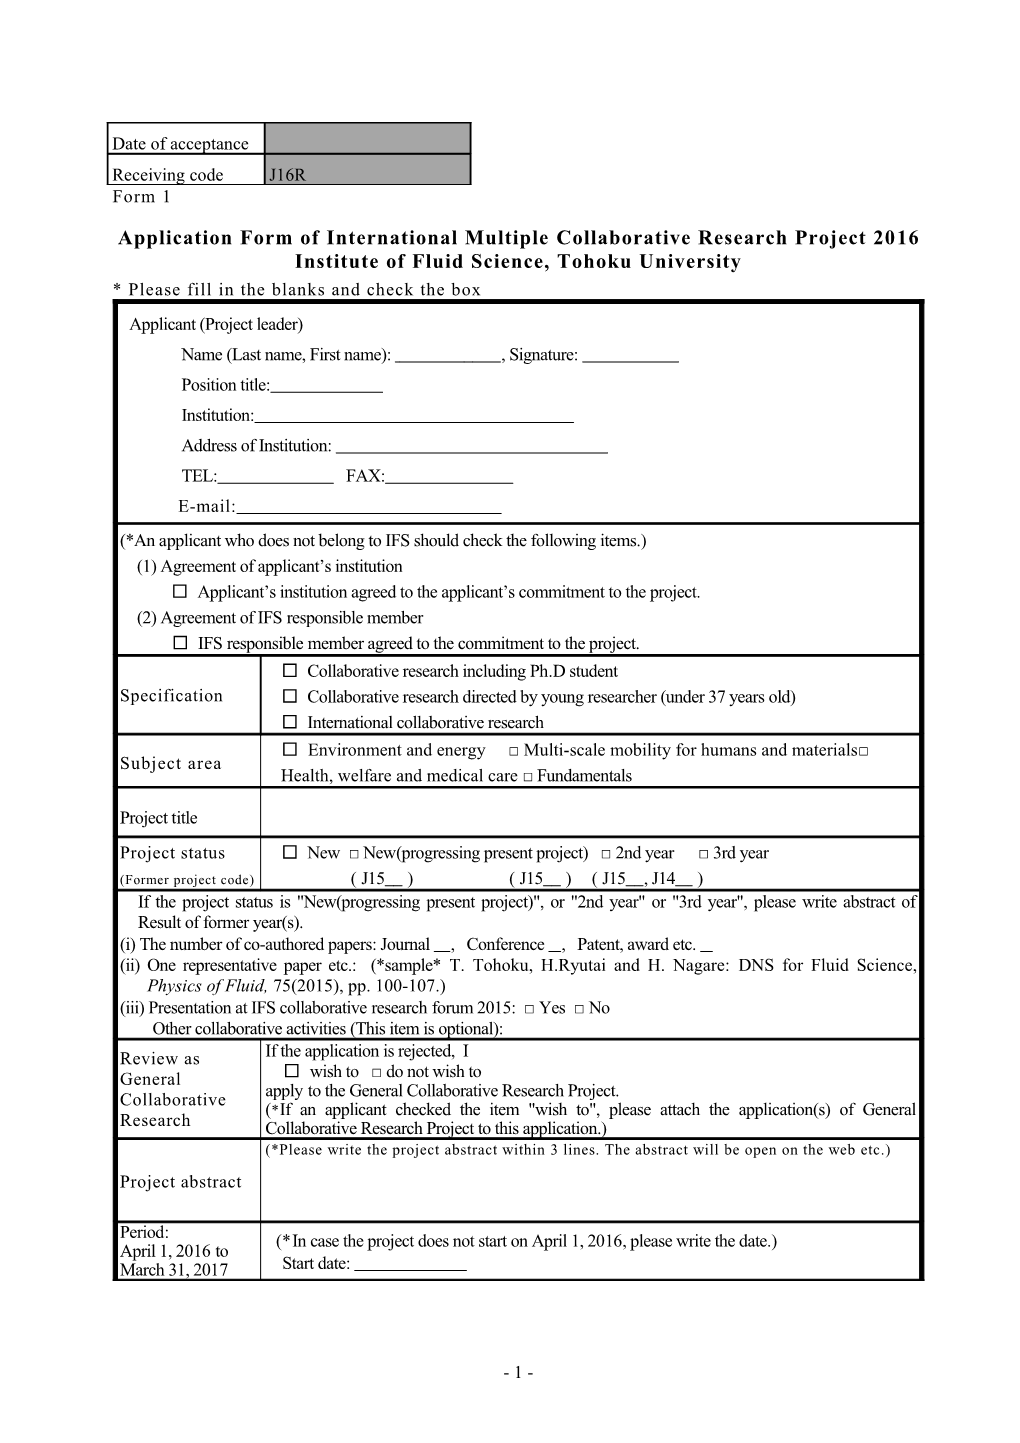 Application Form of IFS General Collaborative Research Project